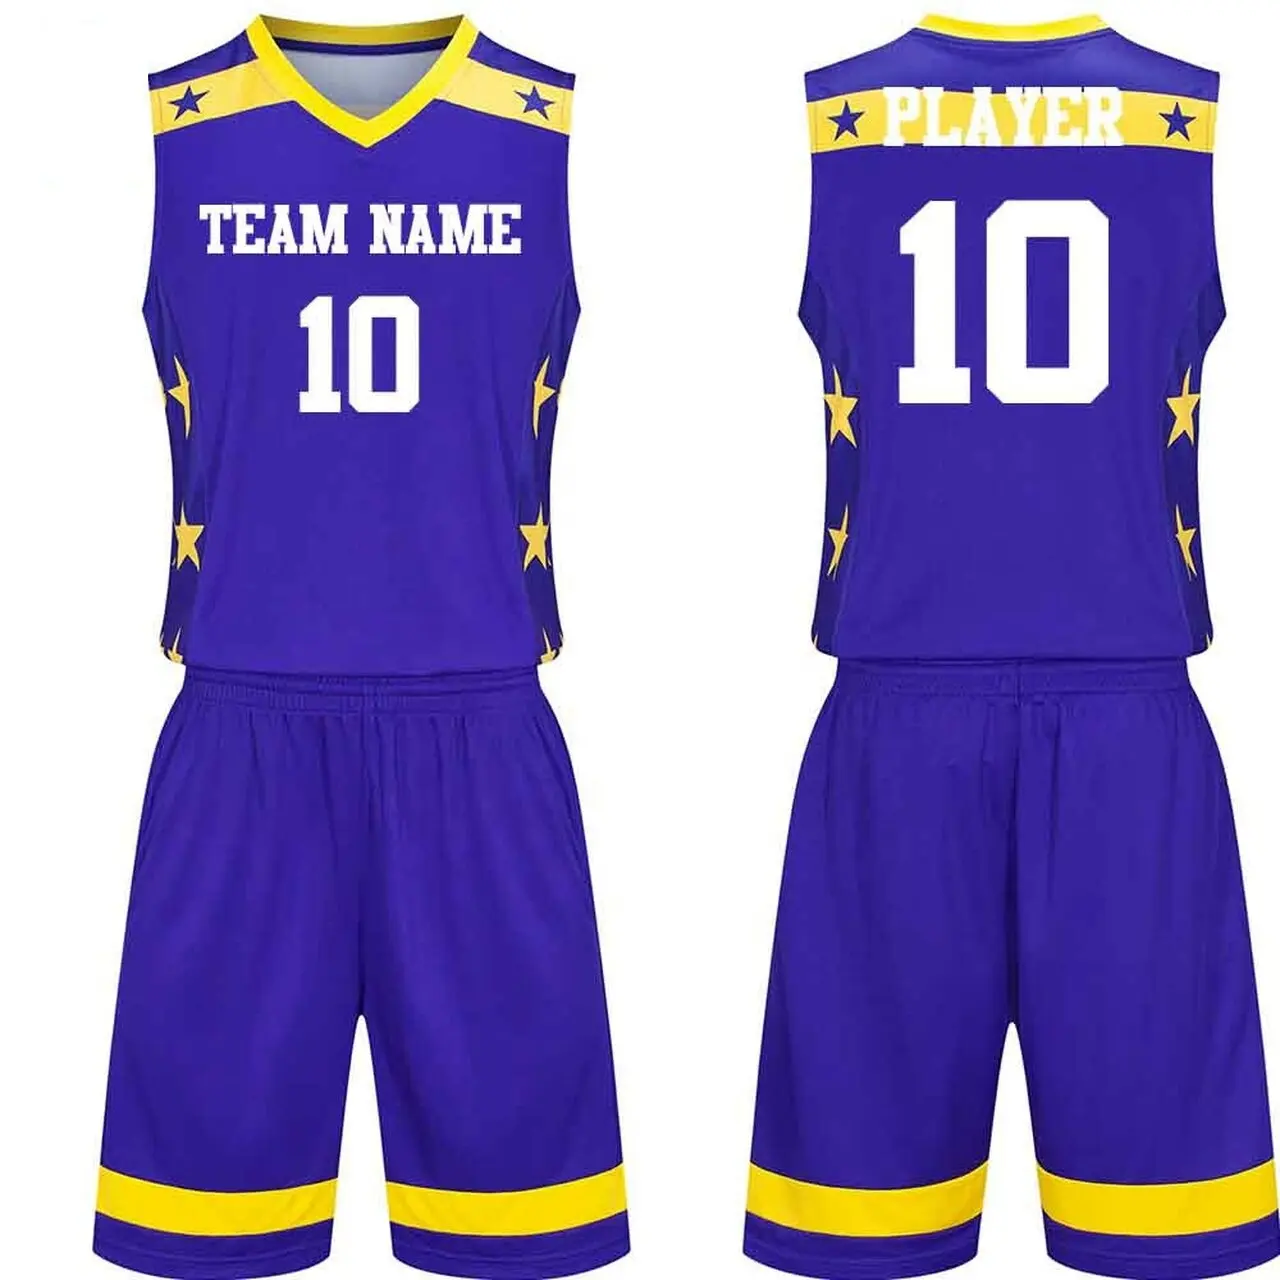 New Design Cheap Price Basketball Sets Sublimated For Men's Shorts and Jersey Set with Custom Team Name Logos and Numbers